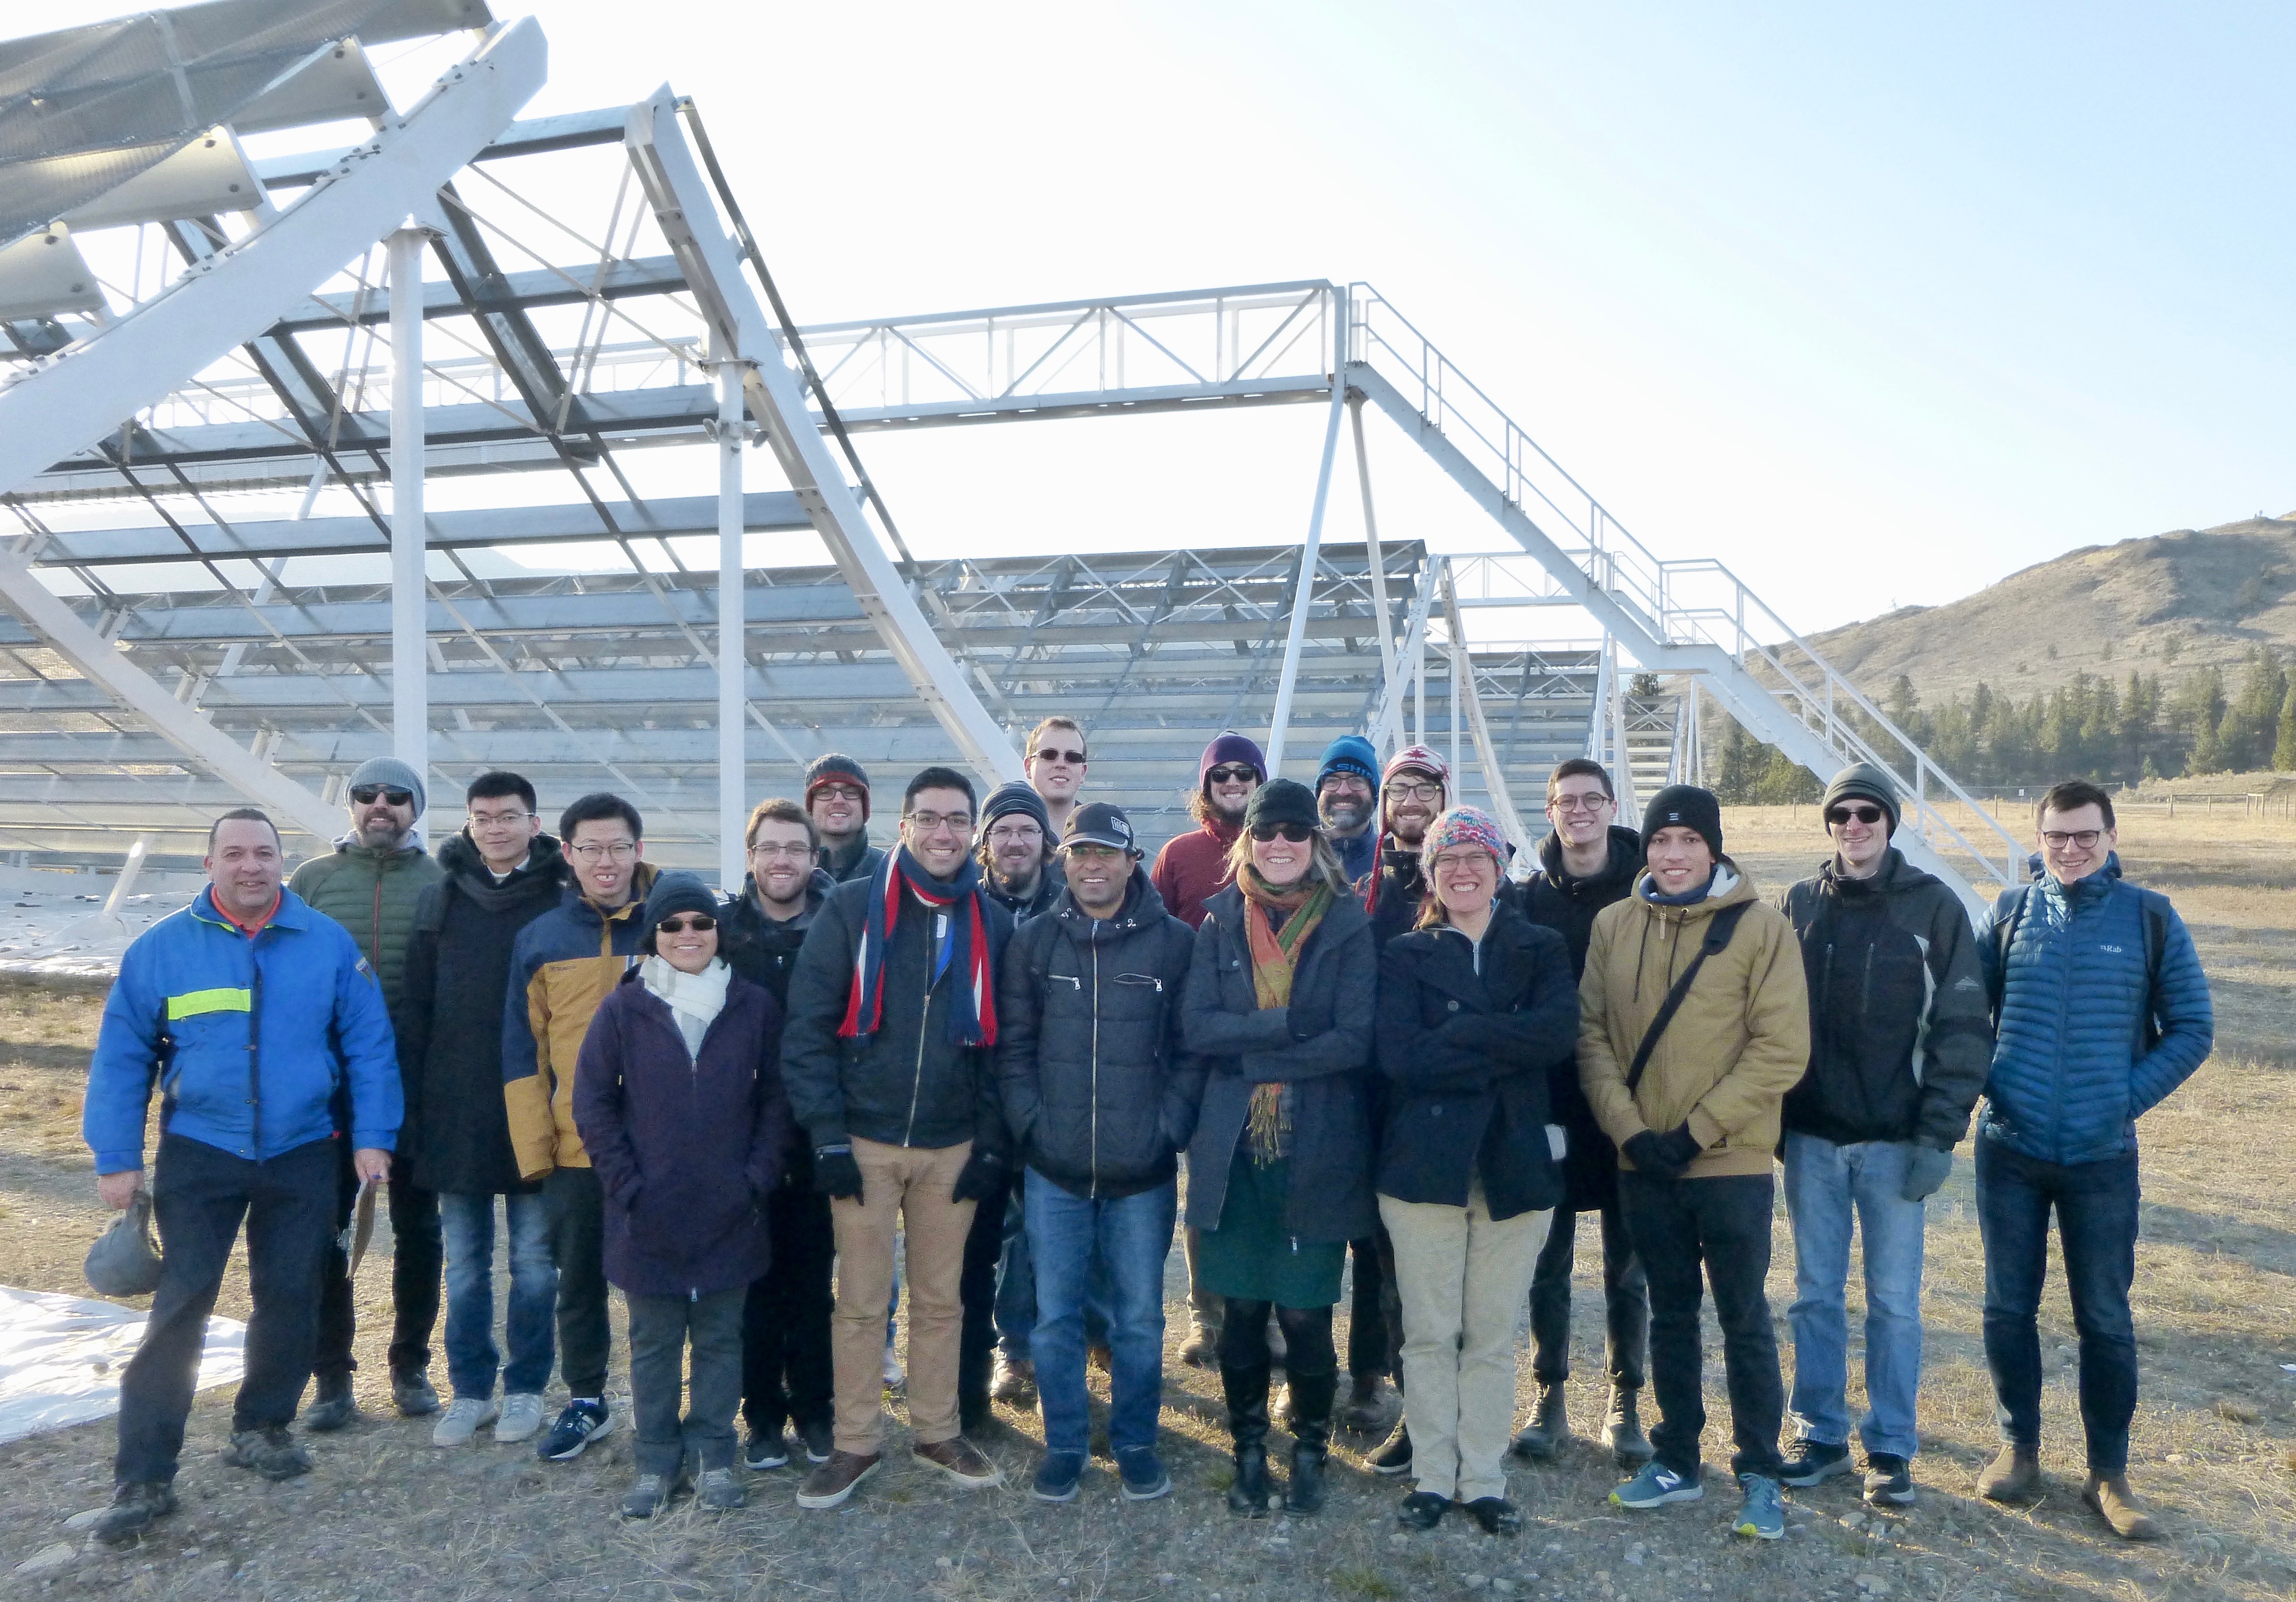 Group shot of NTCO students and others in front of the CHIME telescope